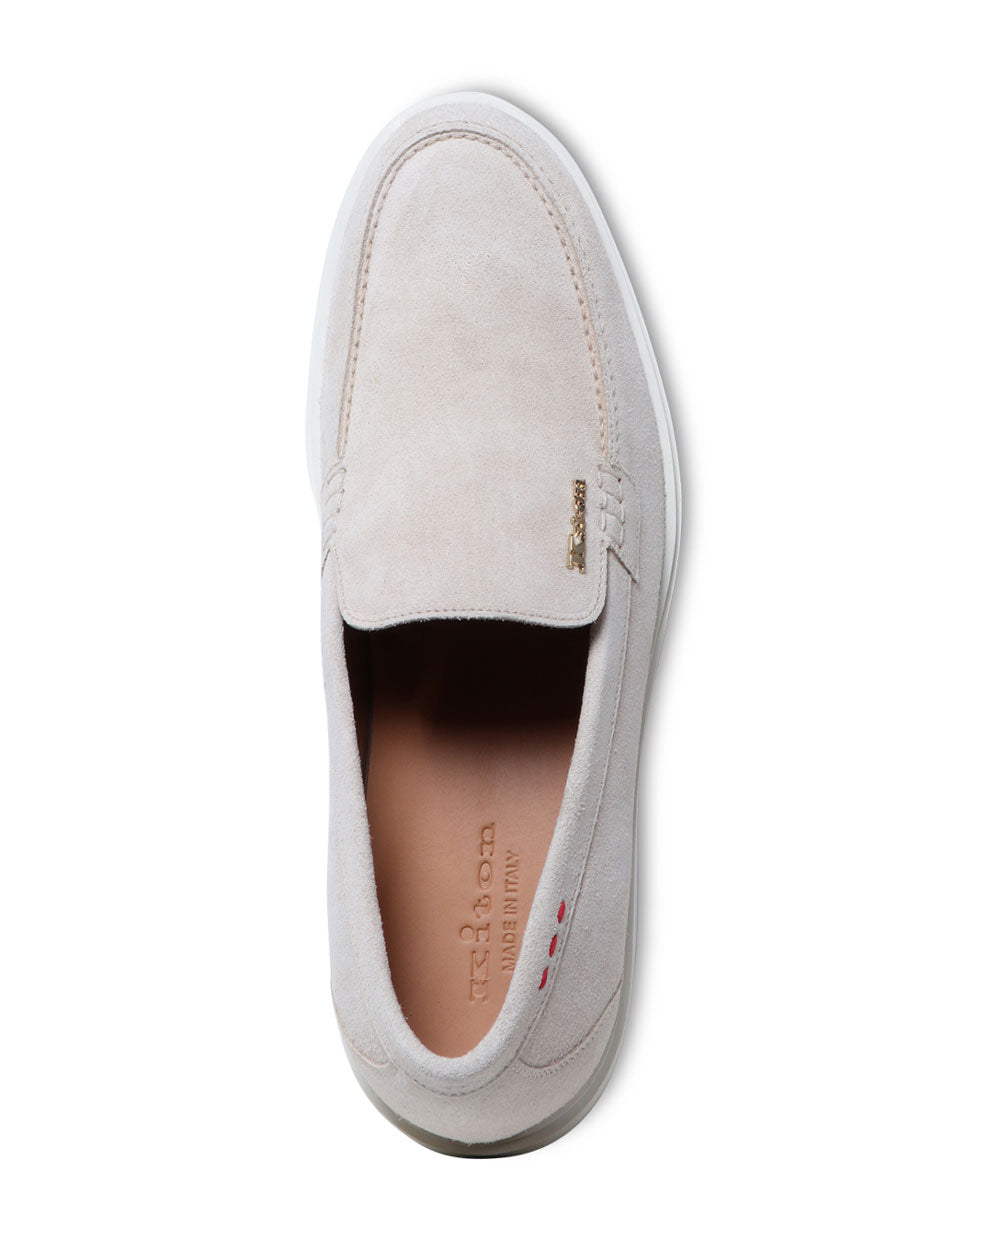 Suede Causal Loafer in Light Tan